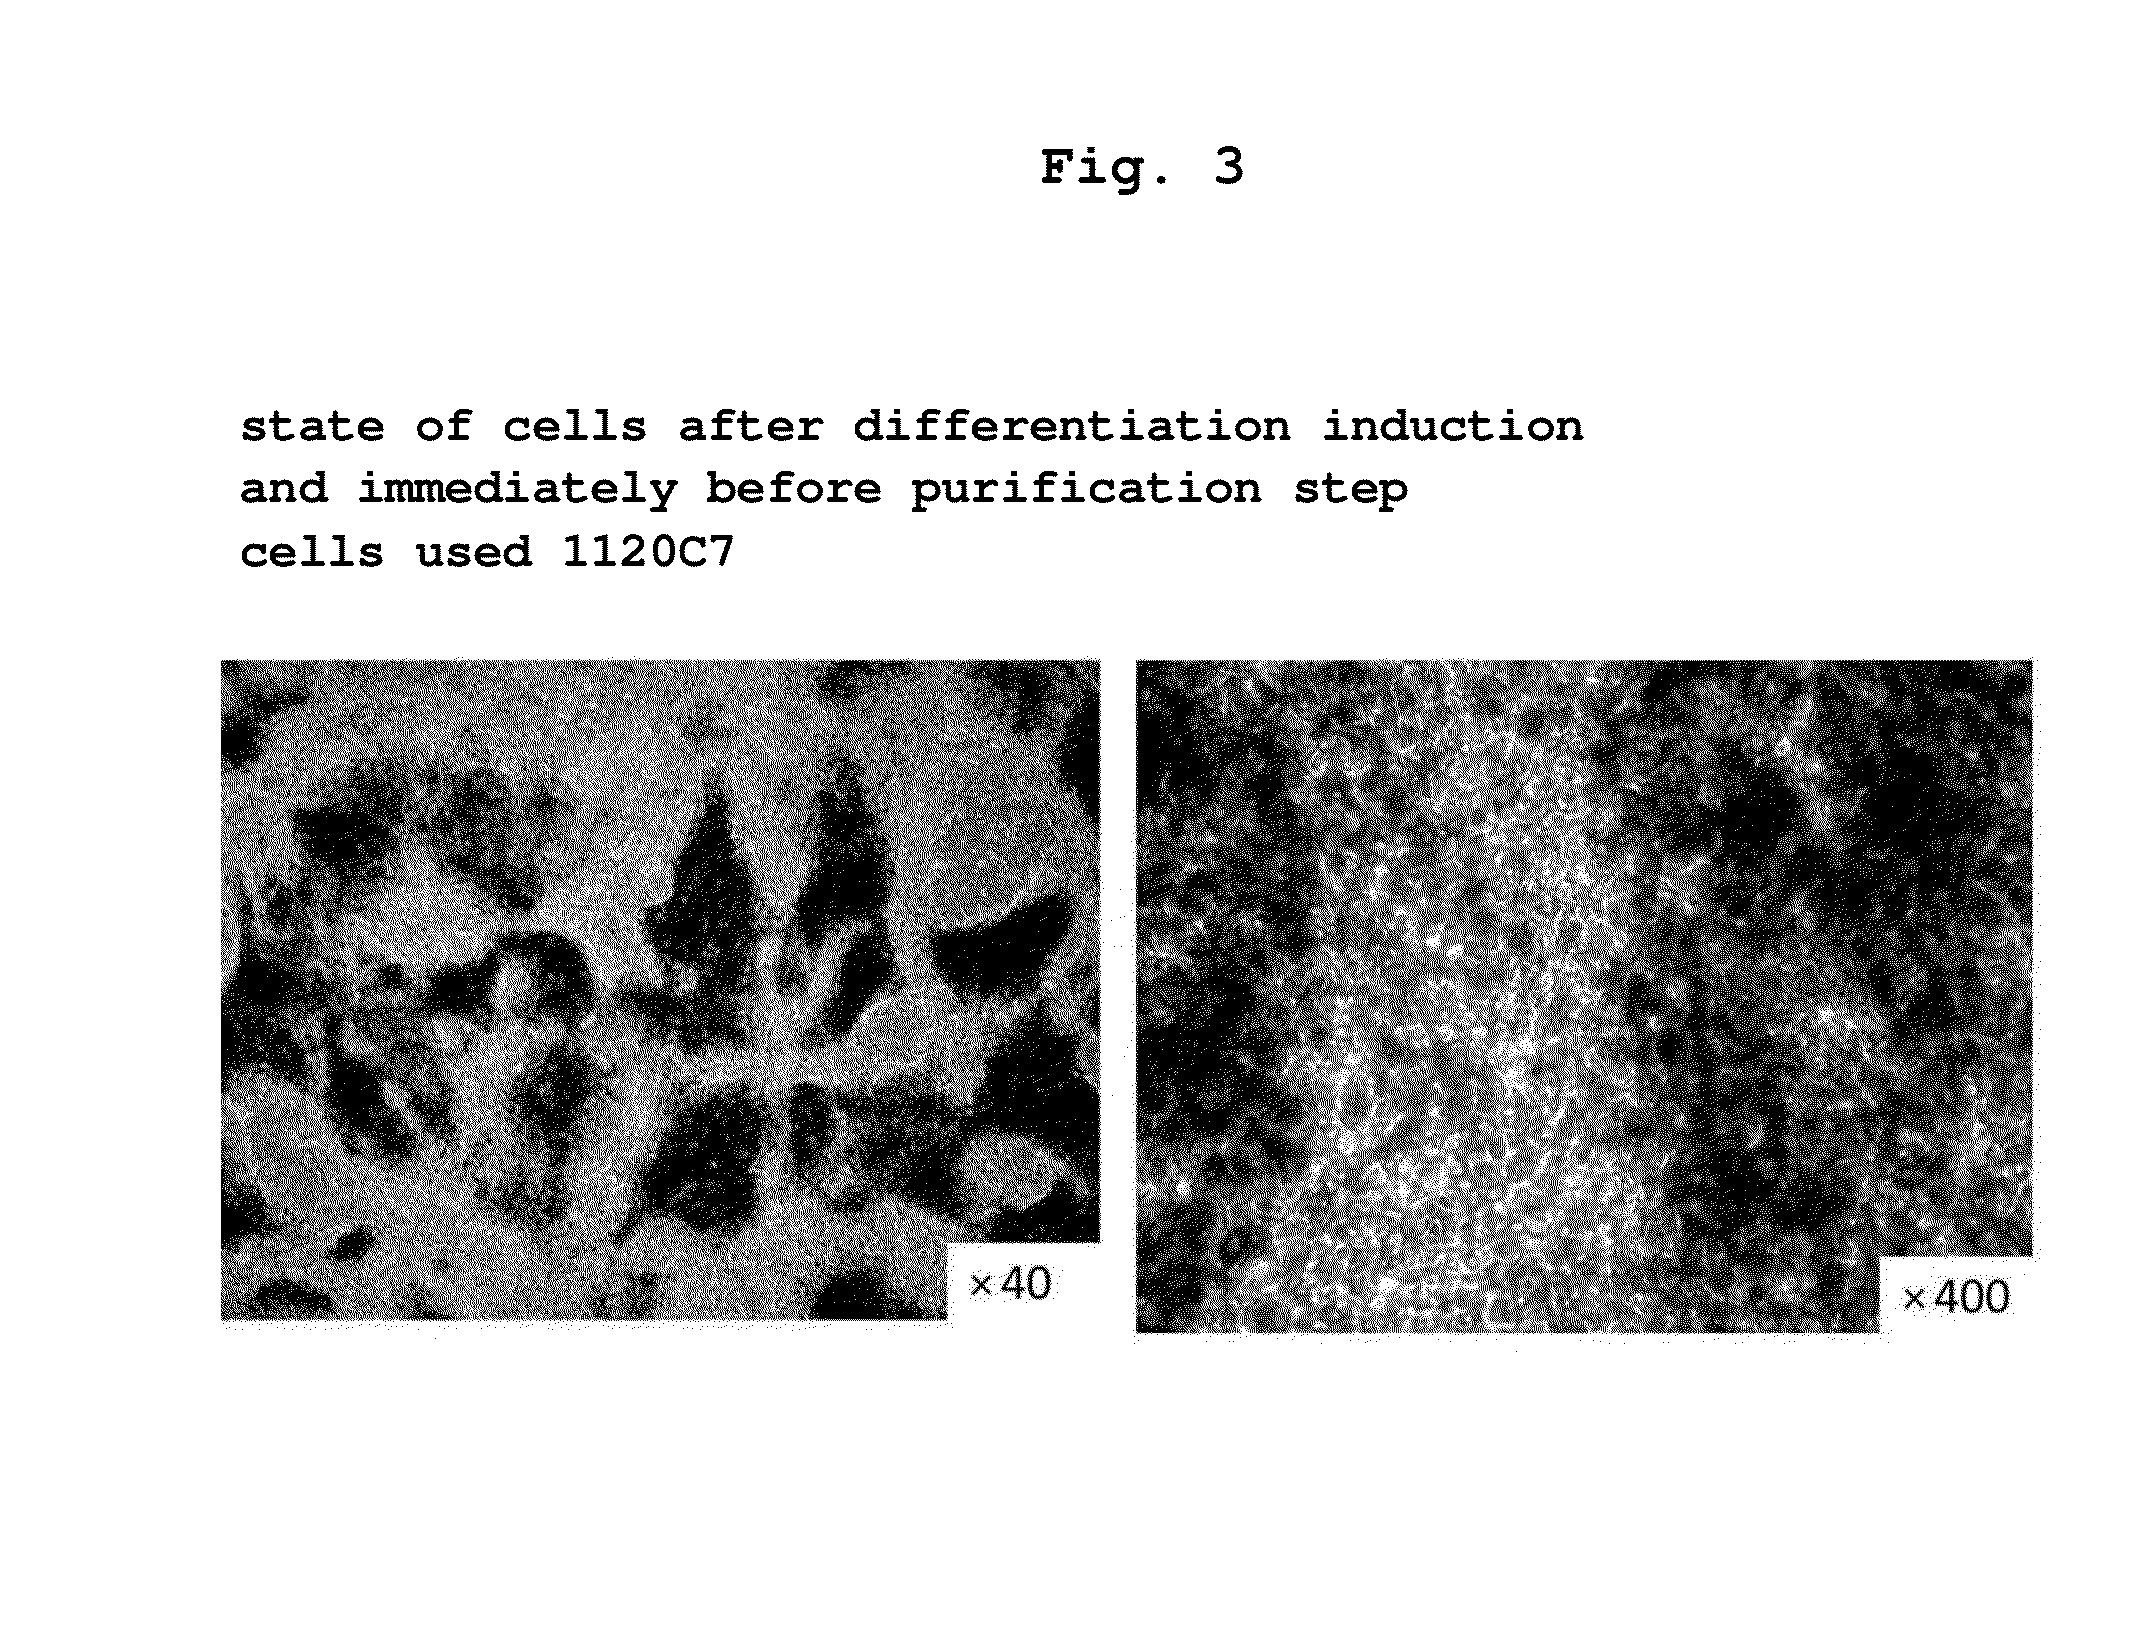 Method for purification of retinal pigment epithelial cells